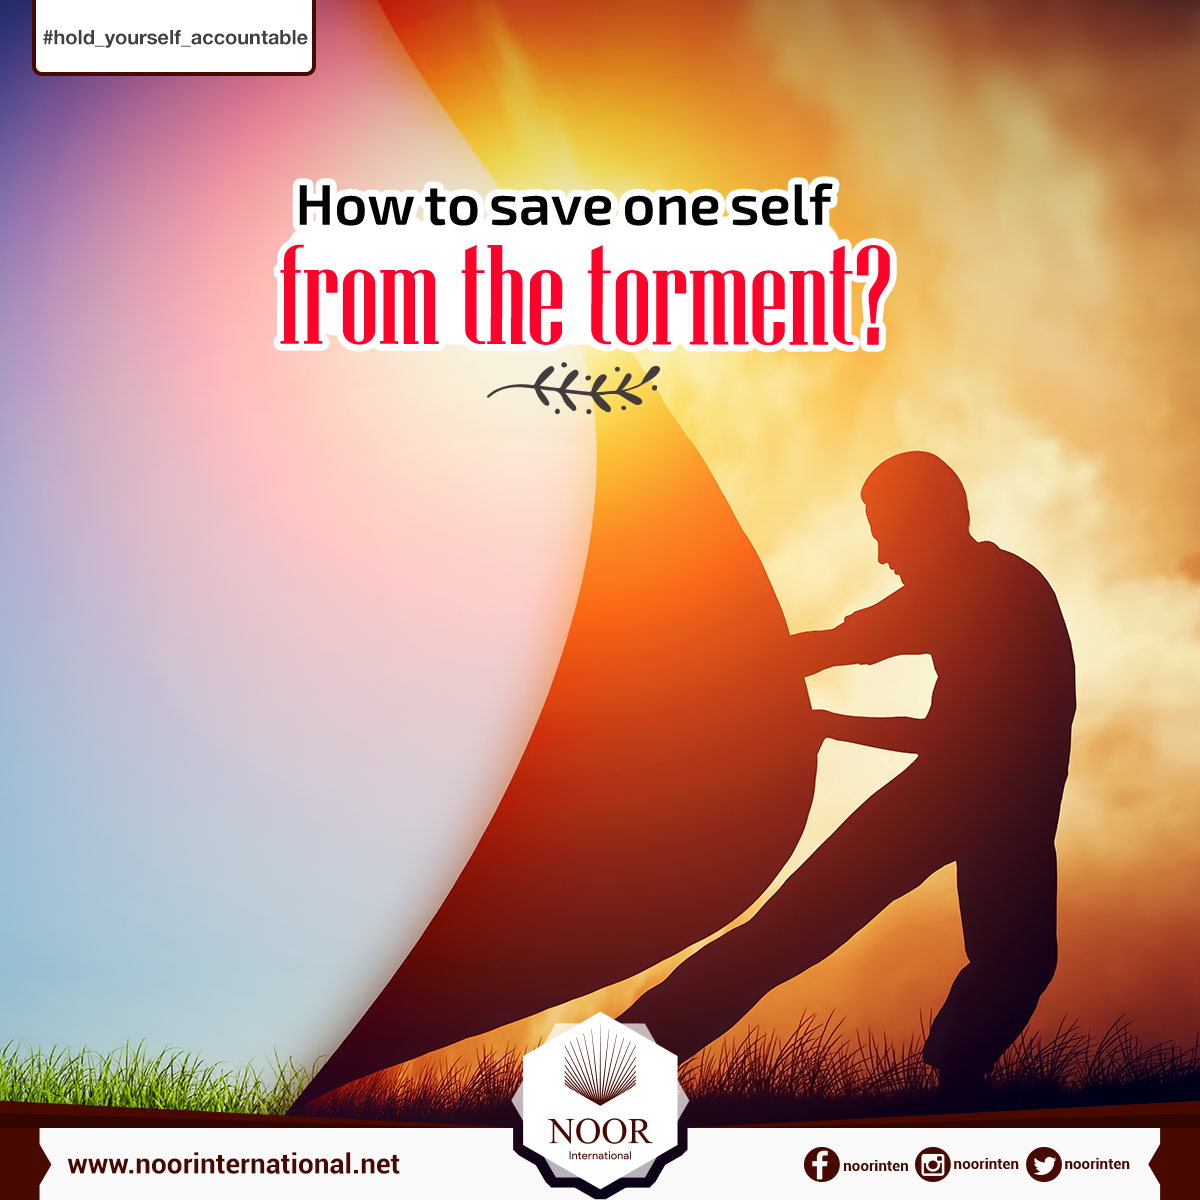 How to save one self from the torment?